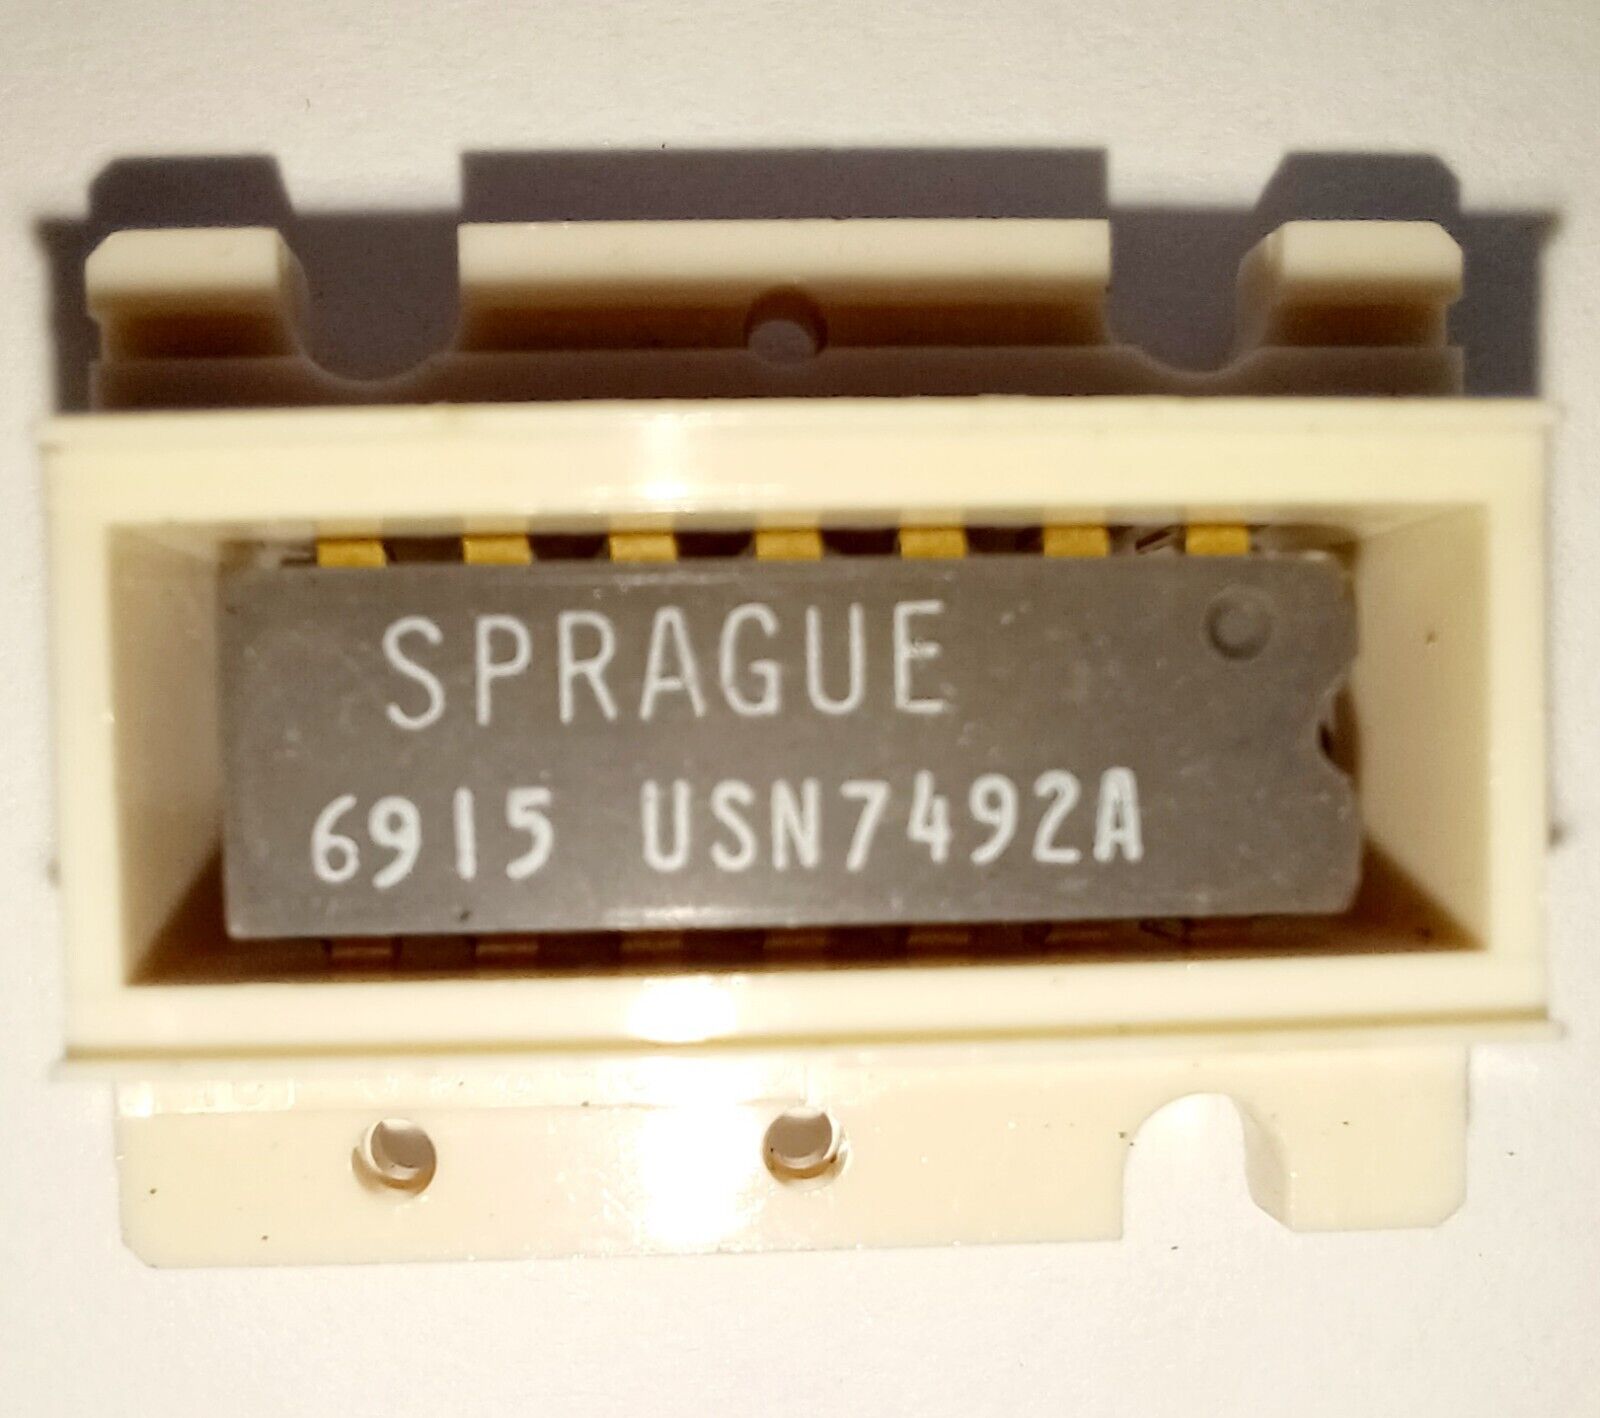 Sprague USN7492A IC chip microchip DIP-14 vintage from 1969   Gold plated legs